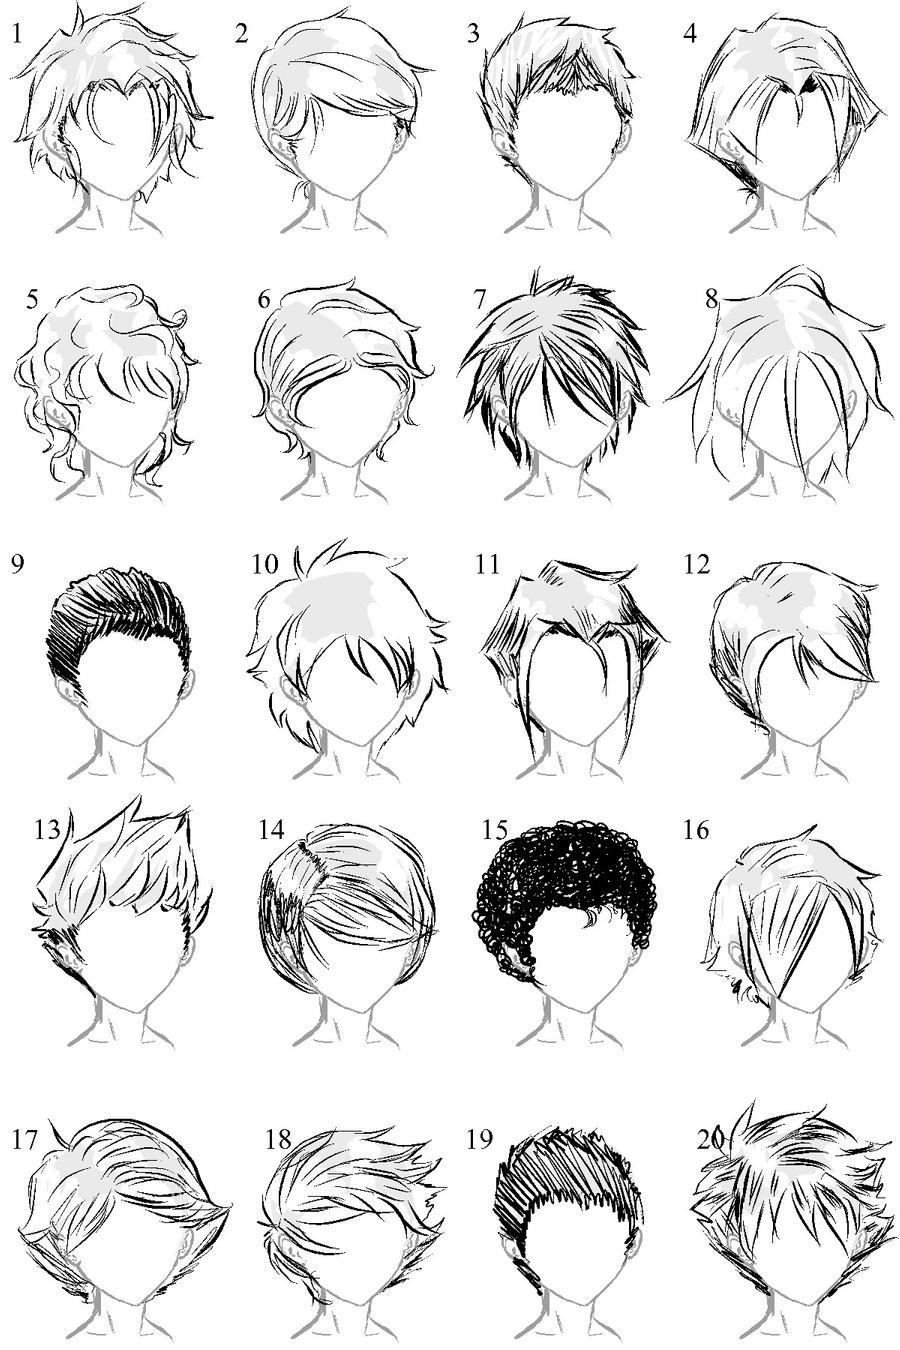 Drawing Hairstyles Male
 20 More Male Hairstyles by LazyCatSleepsDaily on DeviantArt